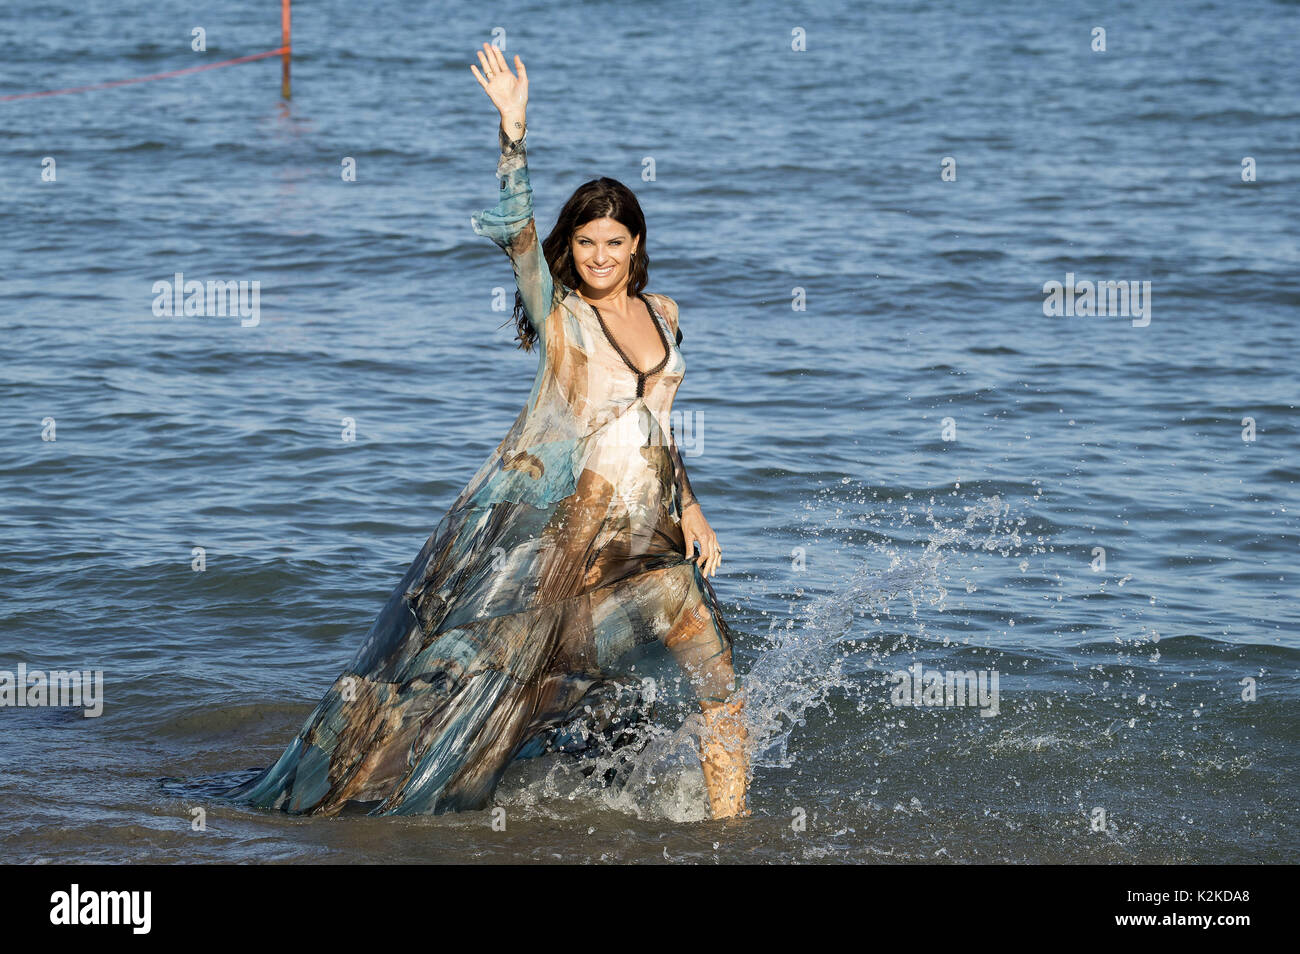 Isabeli Fontana during a photocall ahead of the 74th Venice Film Festival 2017 on August 29, 2017 in Venice, Italy. | usage worldwide Stock Photo